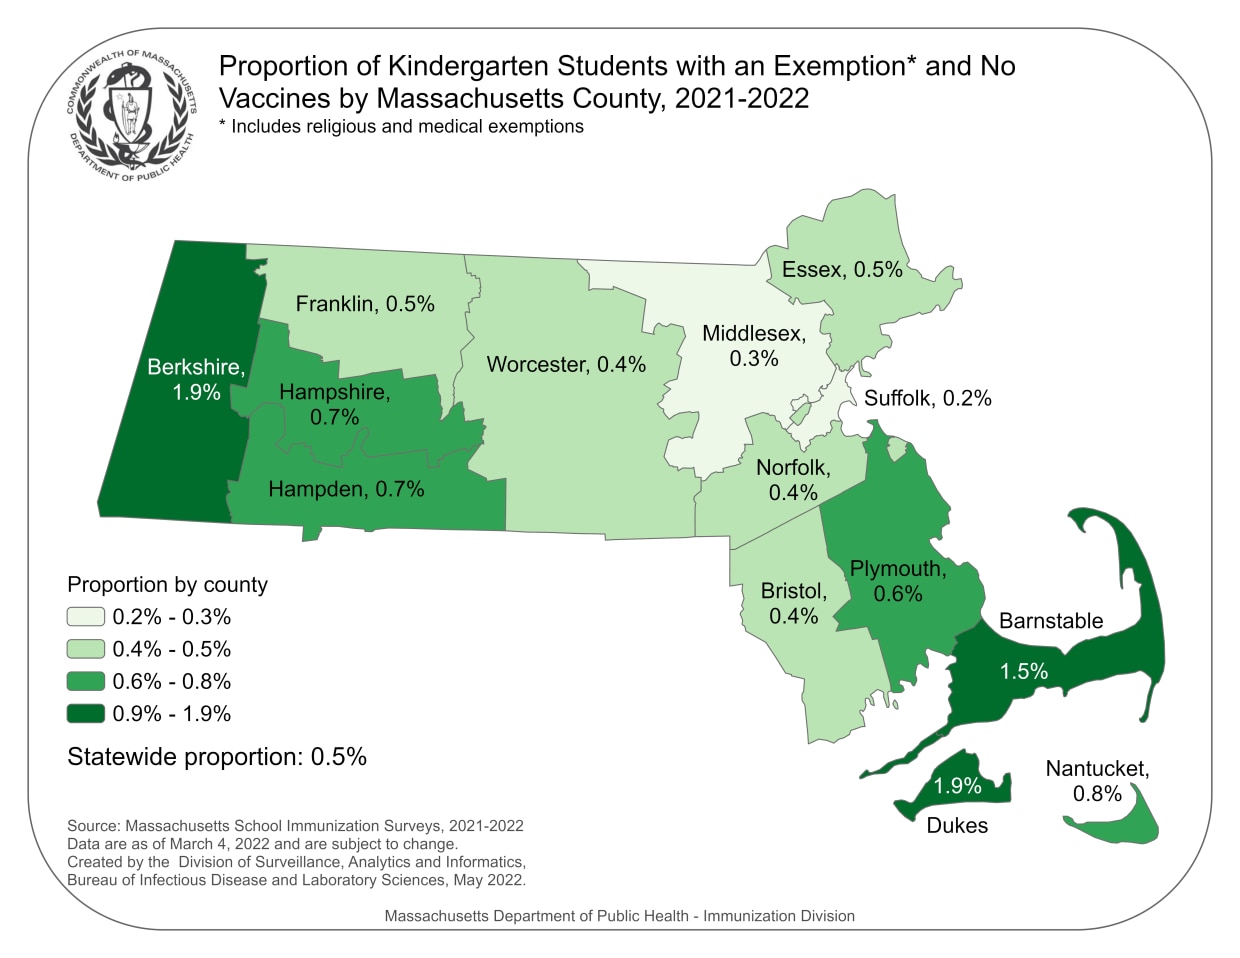 Map shows Rates of Kindergarten Students by Mass County with Exemptions and No Vaccines, 2021-2022. These are religious and medical exemptions combined. These data are current as of 5/4/22 and are subject to change. The source of these data is via the Mass School Immunization Surveys 2021-2022. State average 1.5% Barnstable 1.9% Berkshire 0.4% Bristol 1.9% Dukes 0.7% Hampden 0.7% Hampshire 0.5% Essex 0.5% Franklin 0.3% Middlesex 0.8% Nantucket 0.4% Norfolk 0.6% Plymouth 0.2% Suffolk 0.4% Worcester